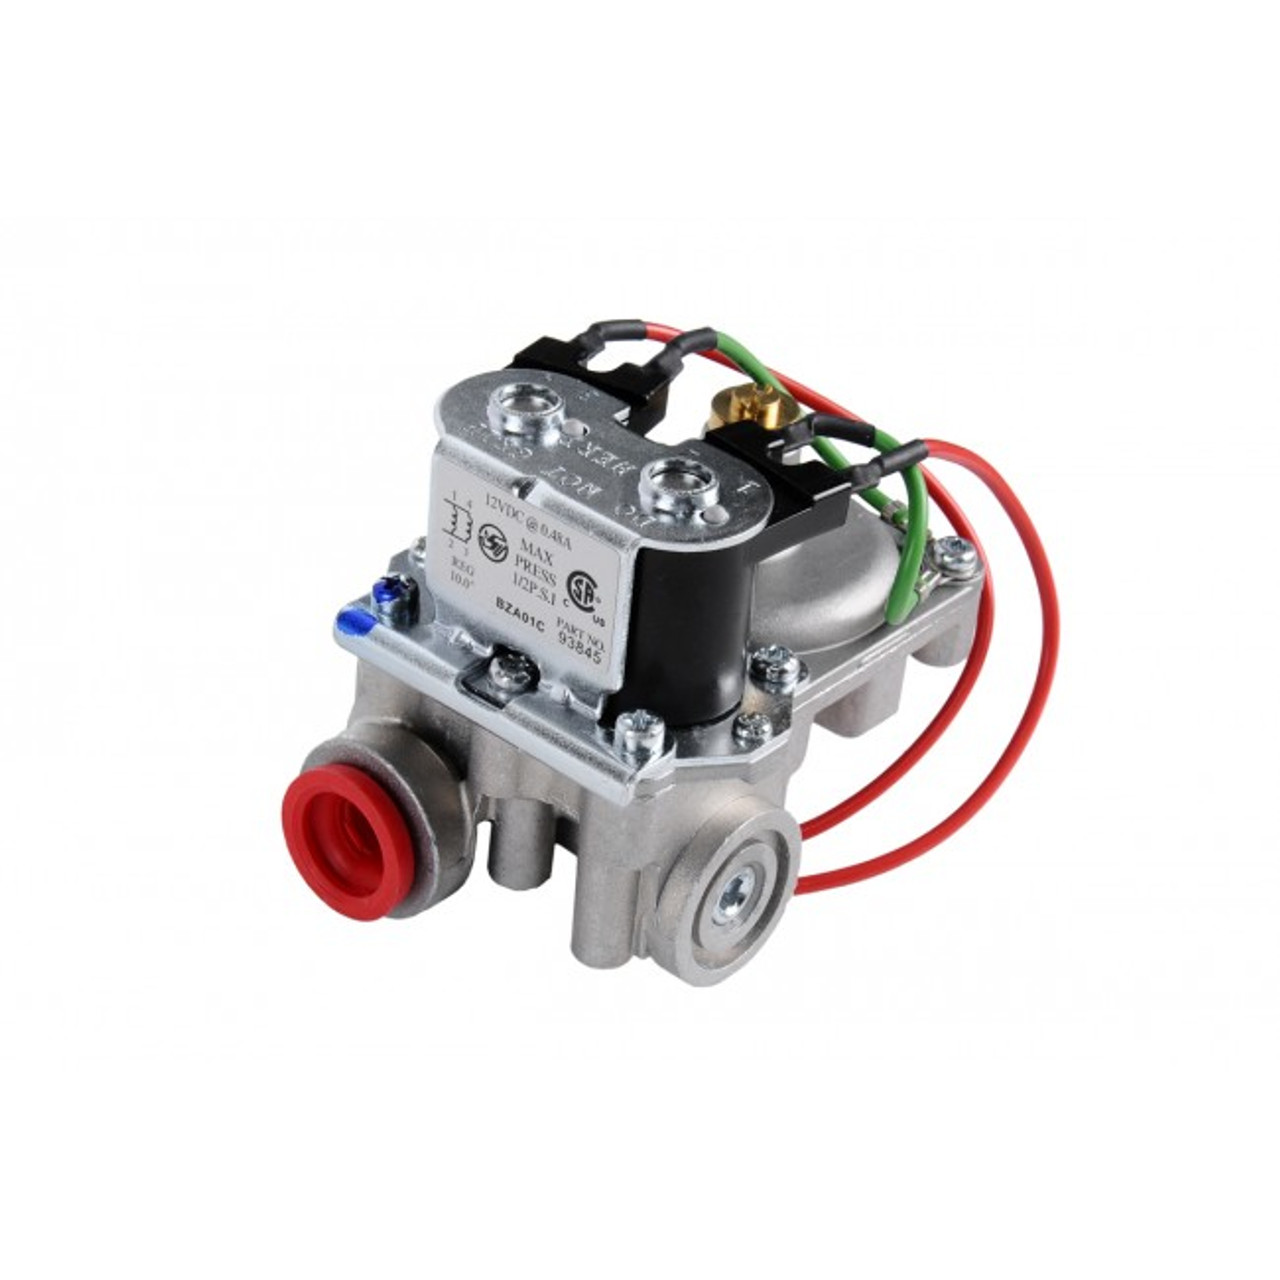 GAS SOLENOID VALVE to suit ATWOOD HWS